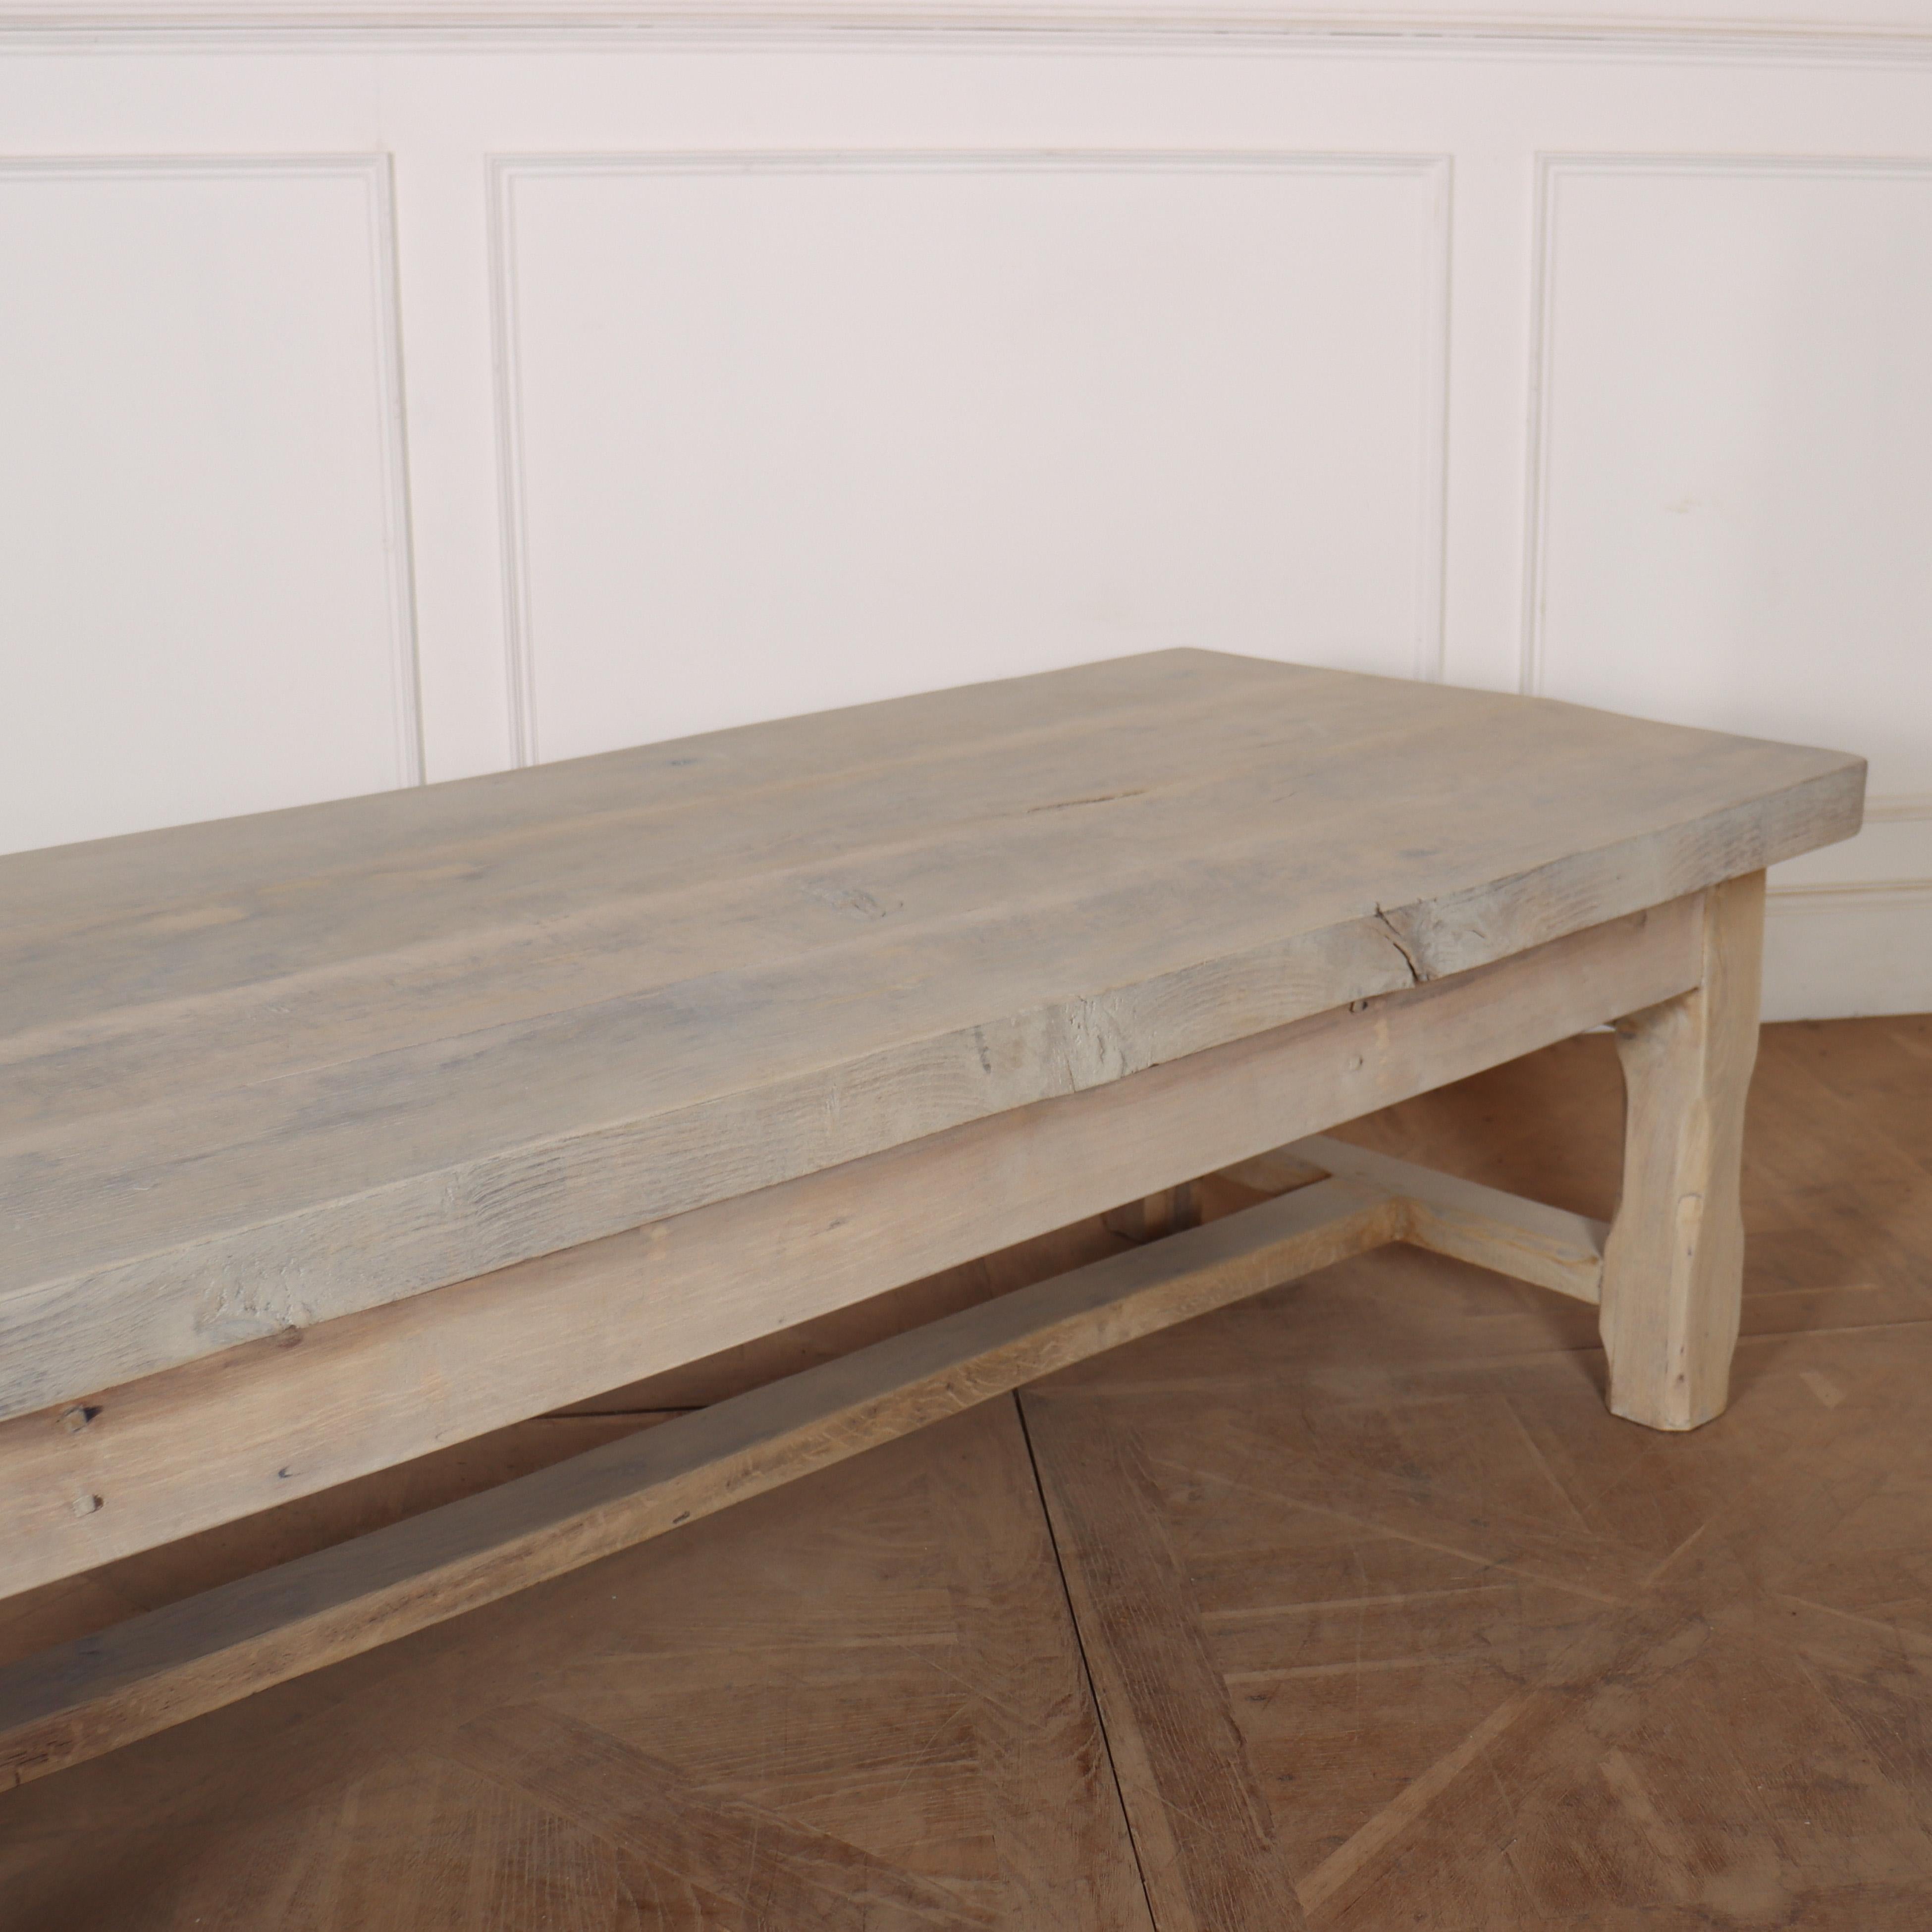 French Bleached Oak Coffee Table In Good Condition For Sale In Leamington Spa, Warwickshire